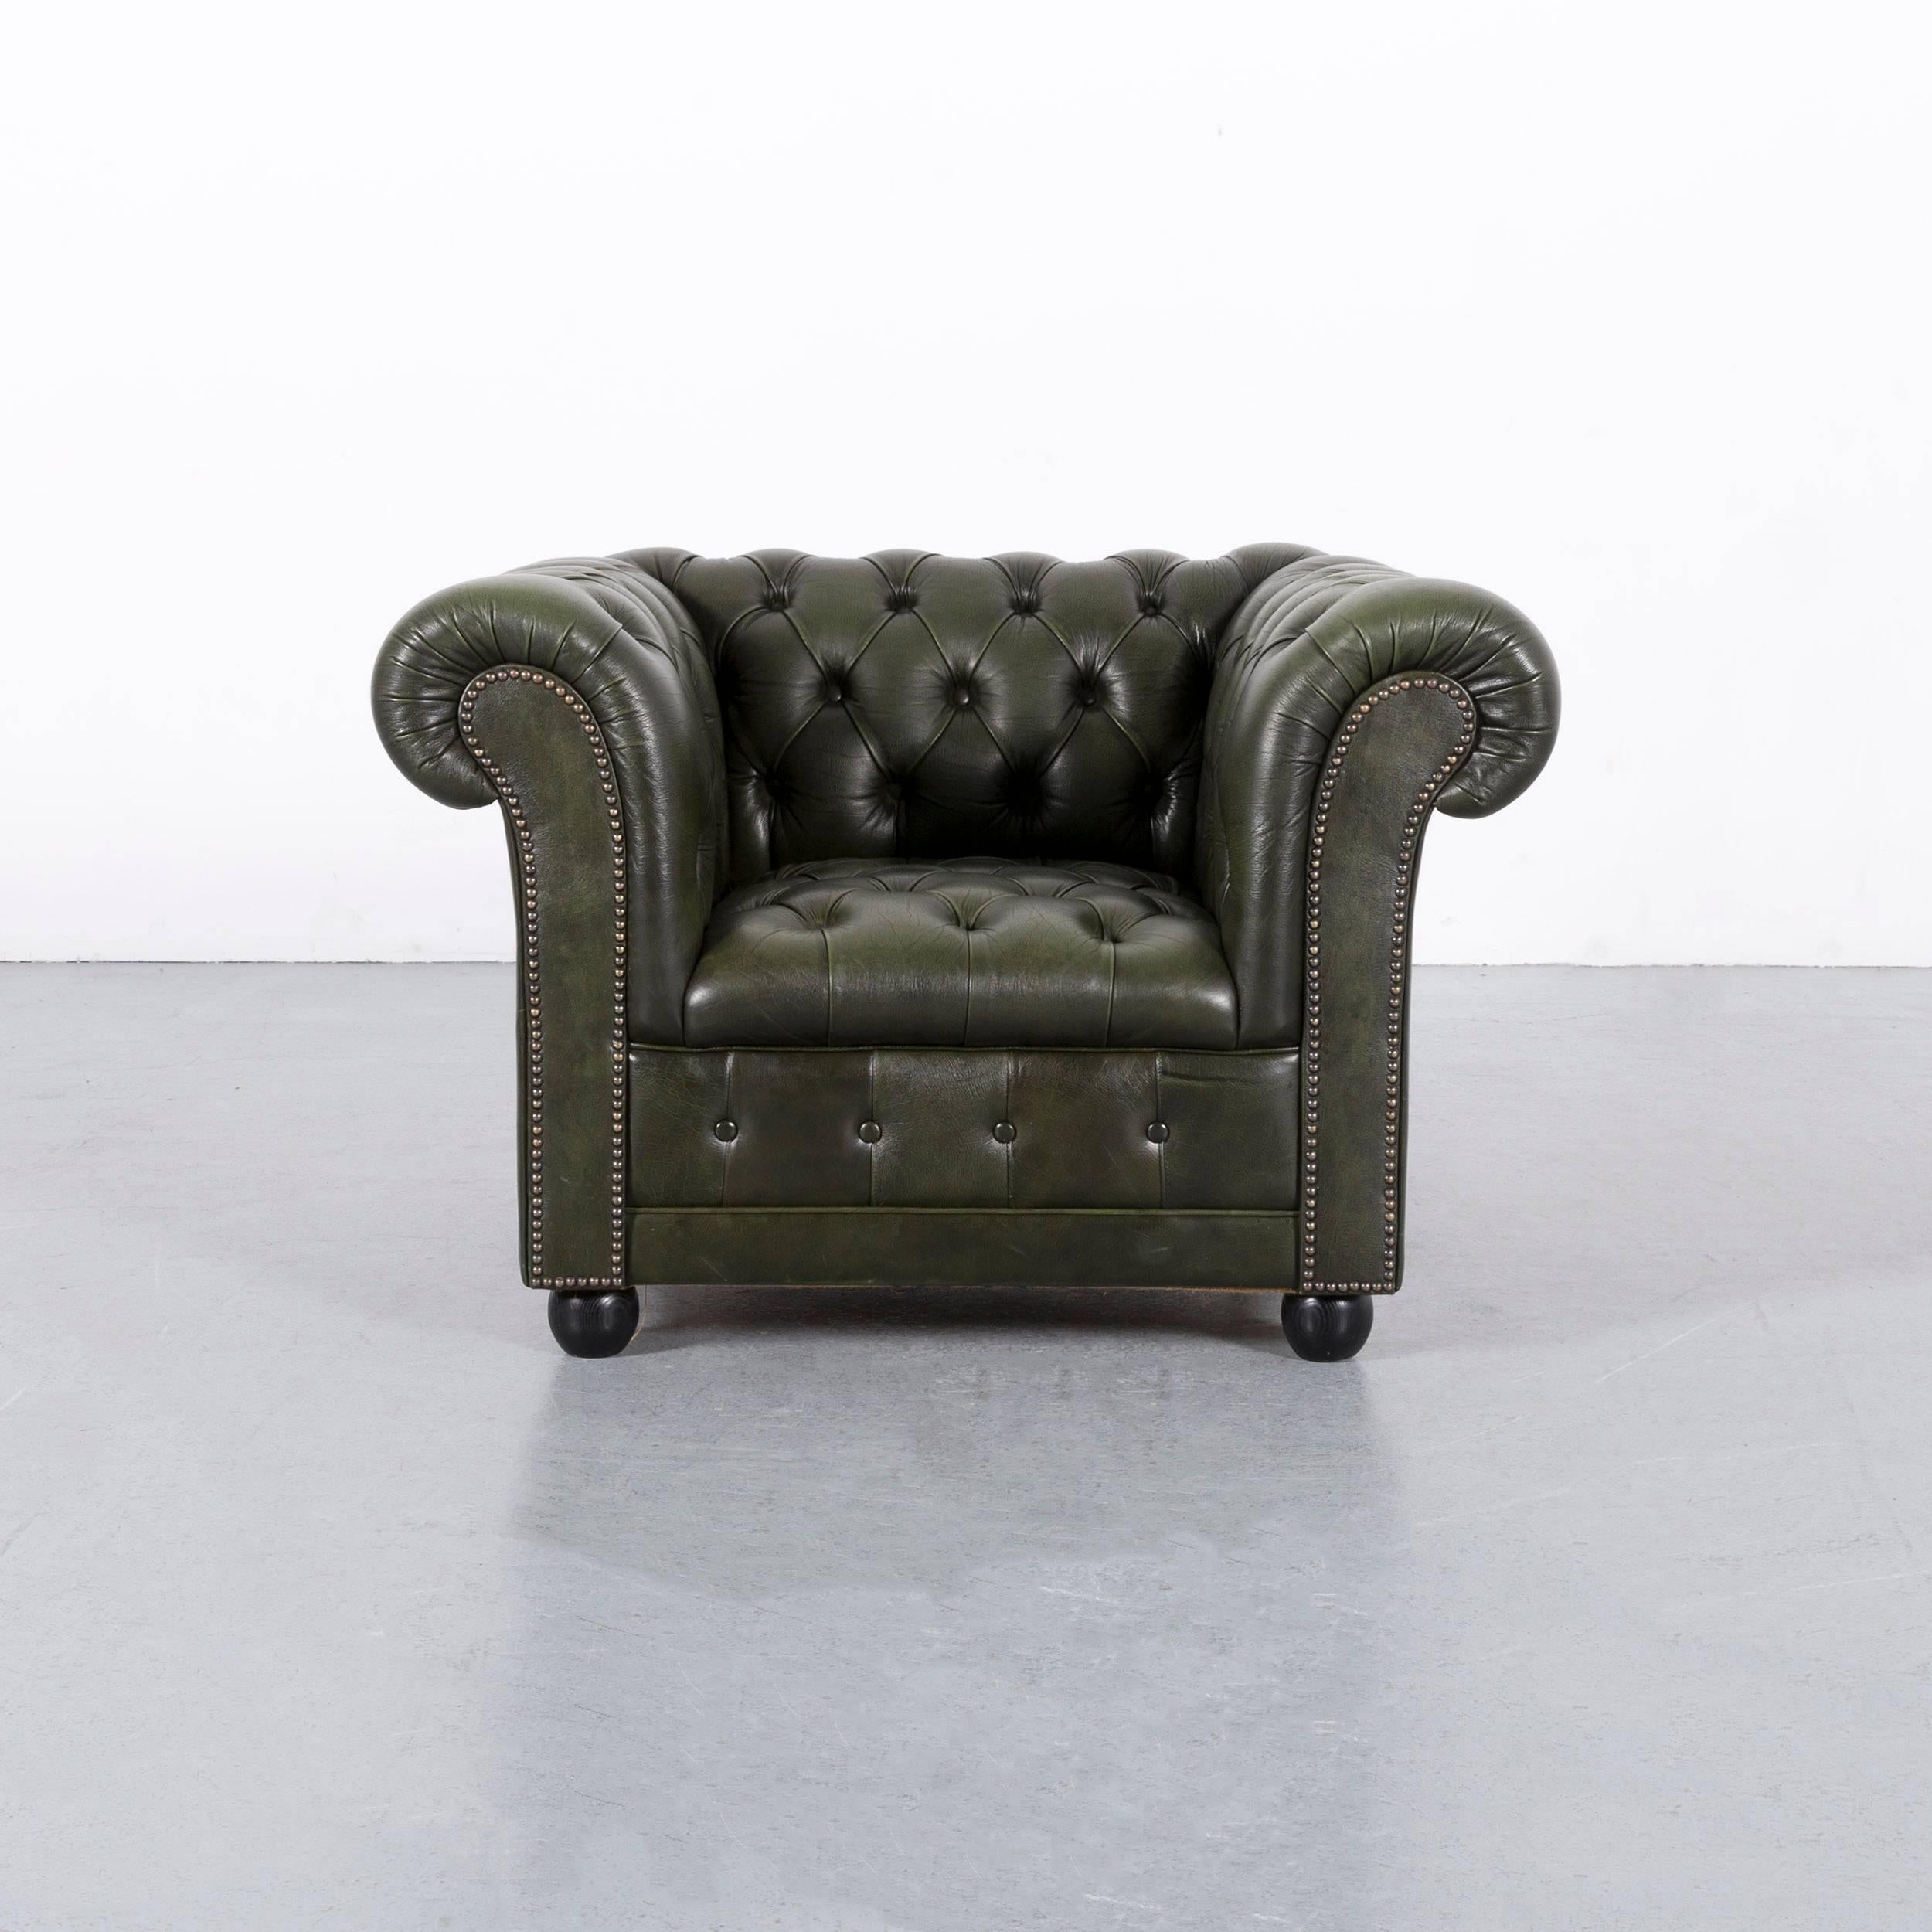 We bring to you an Chesterfield leather armchair green one-seat.






























































